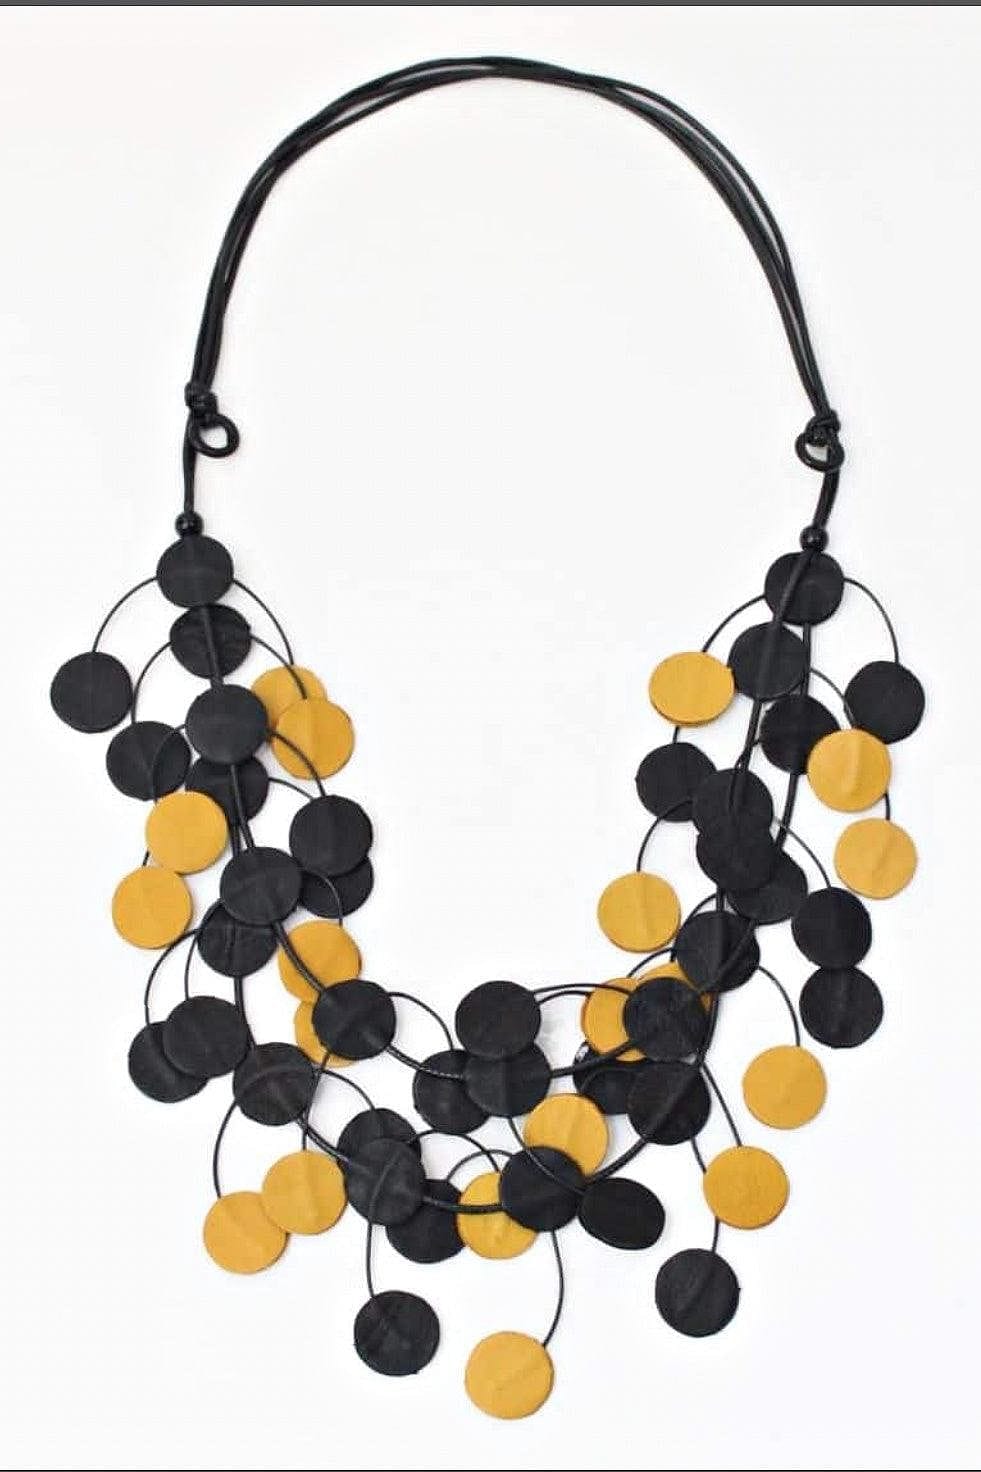 Multi Yellow and Black Leather Dots Necklace designed with small flat leather discs intertwining and strung on an adjustable black cord.